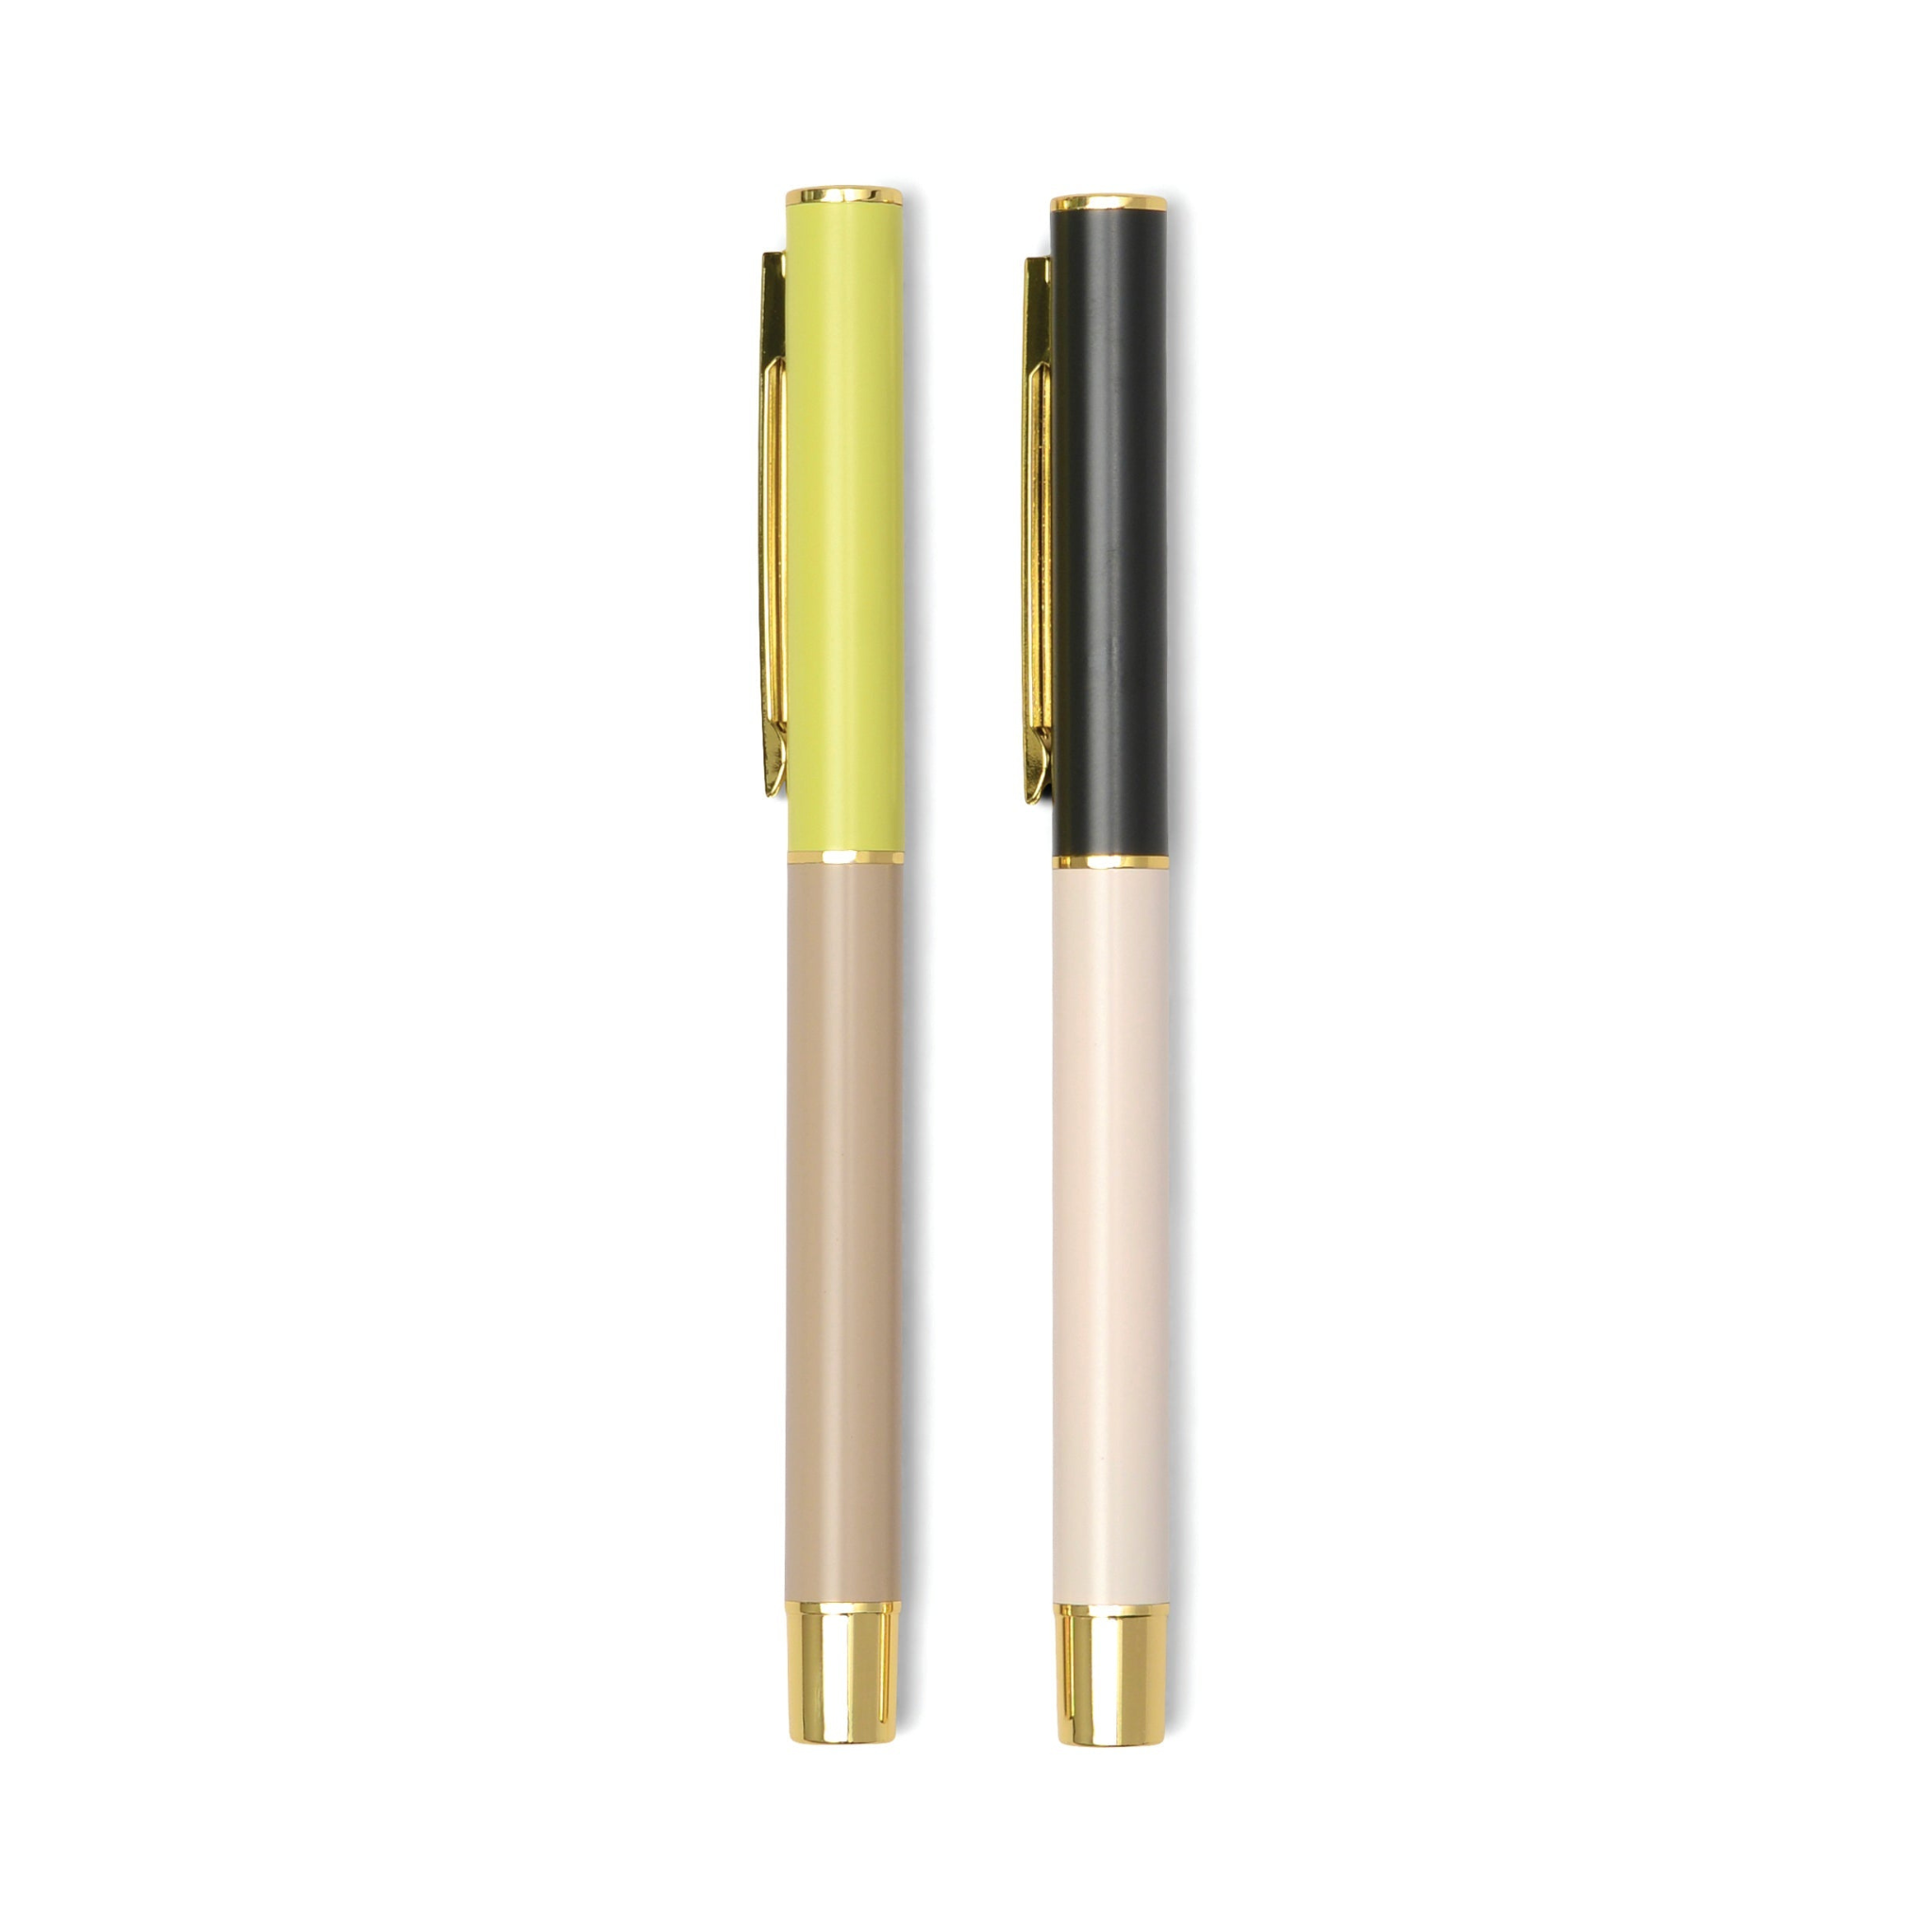 Pens Colorblock (Off White & Taupe) - set of 2